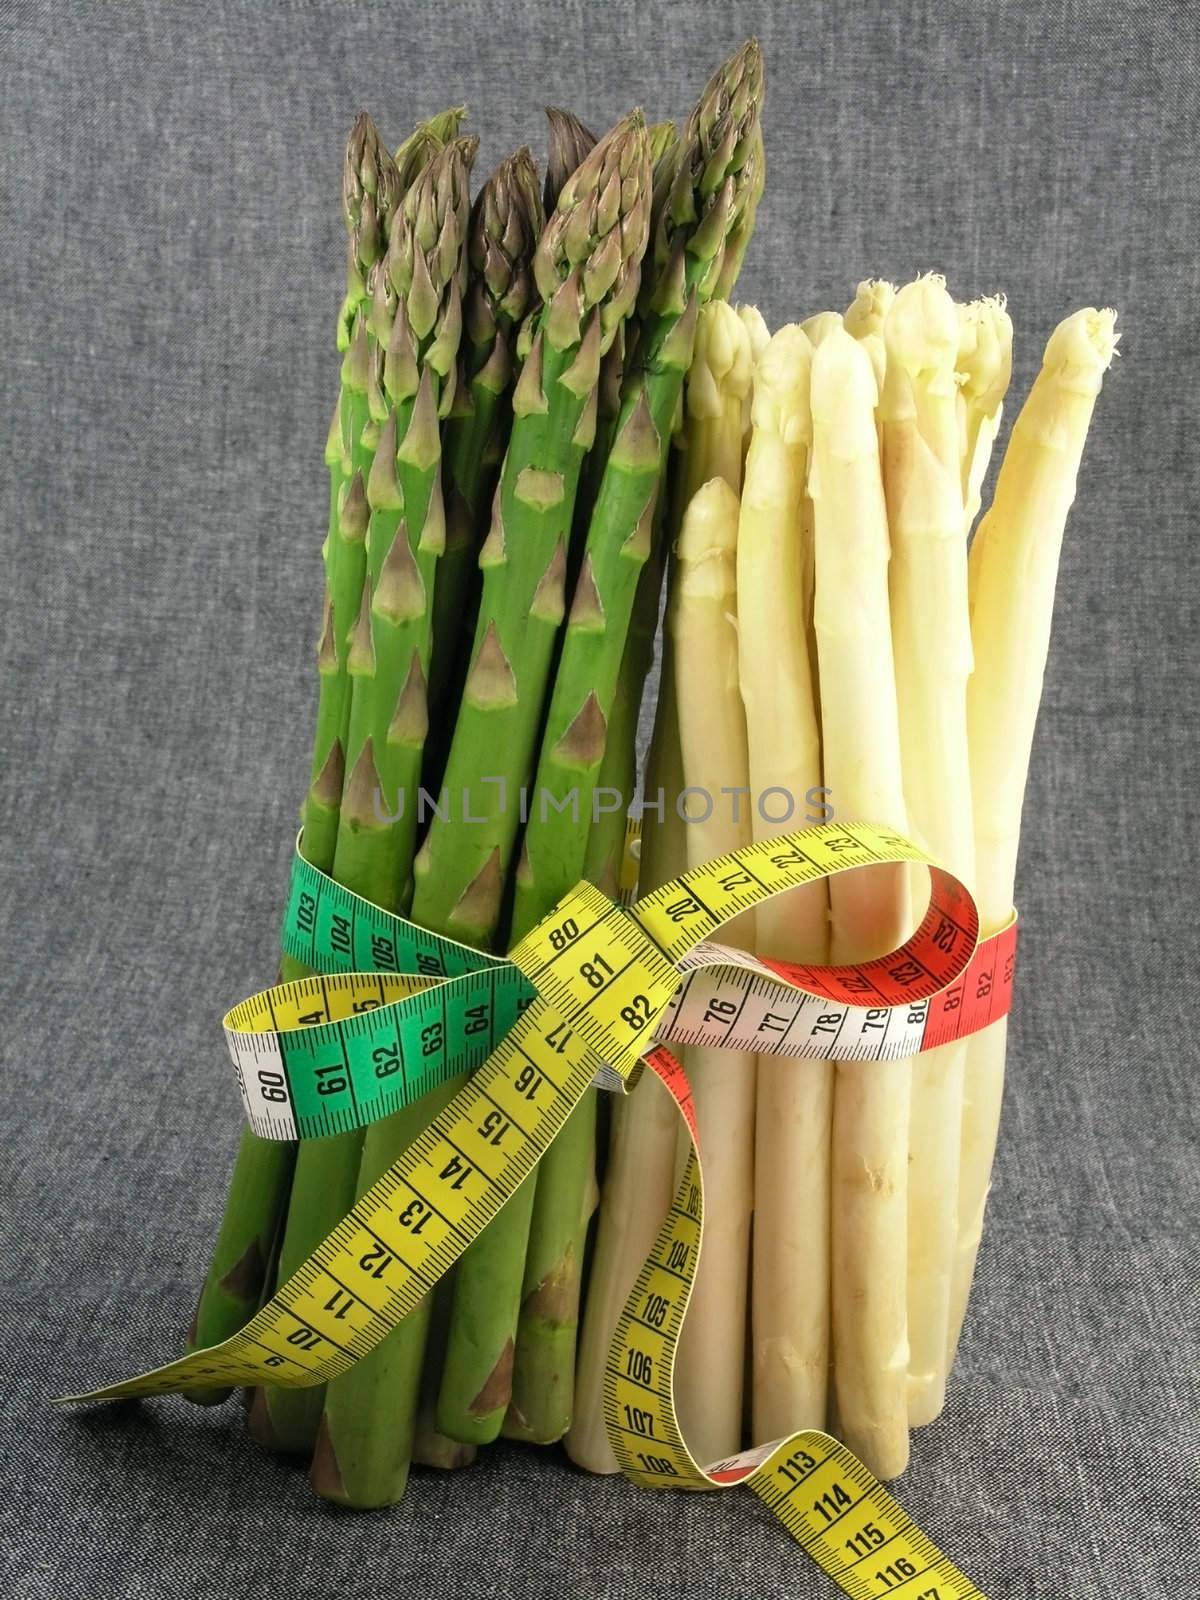  bunch of asparagus isolated on dark background